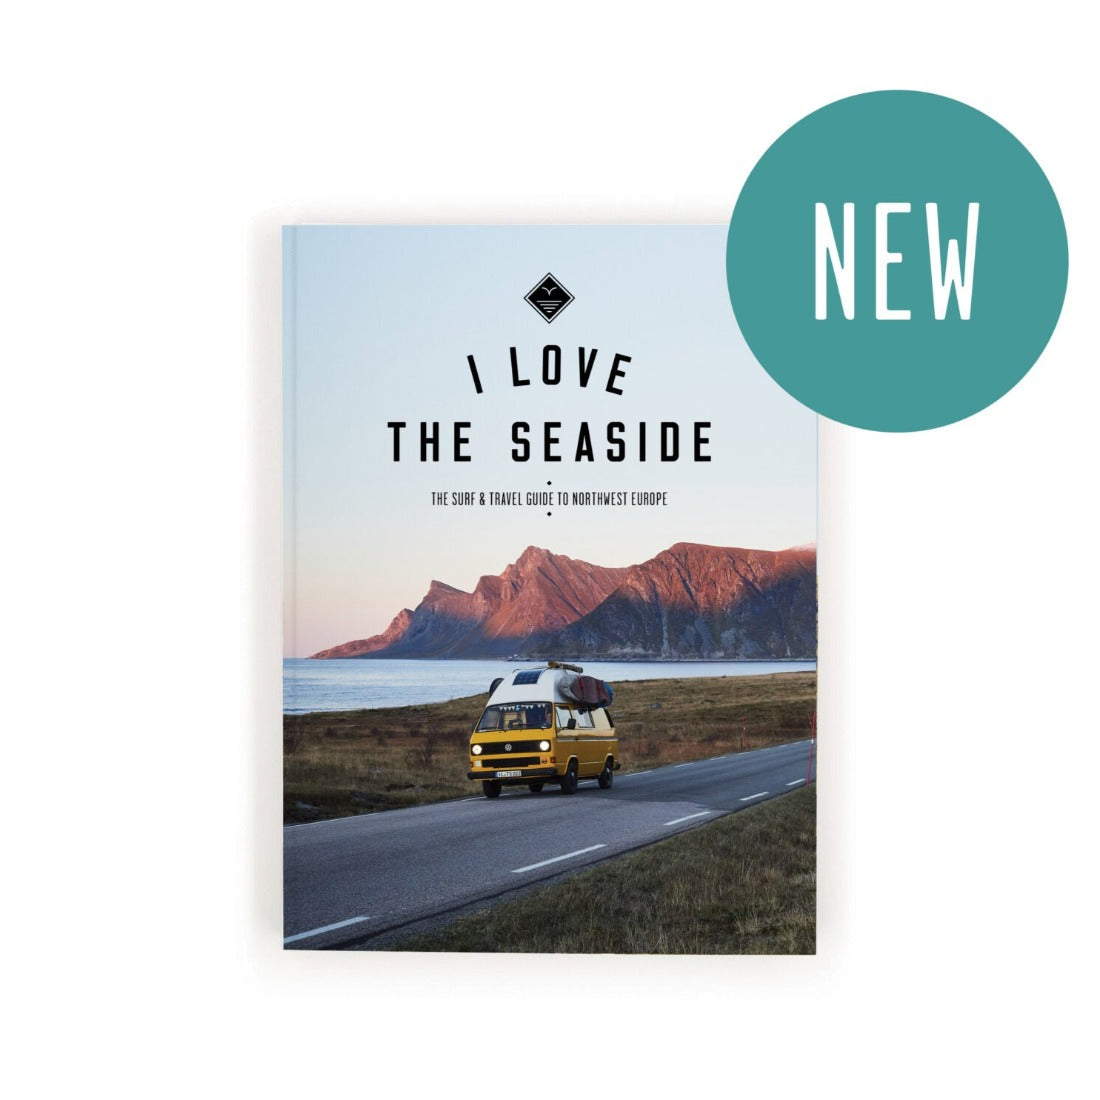 i-love-the-seaside-north-west-europe-travel-guide-book-galway-ireland-blacksheepsurfco-cover